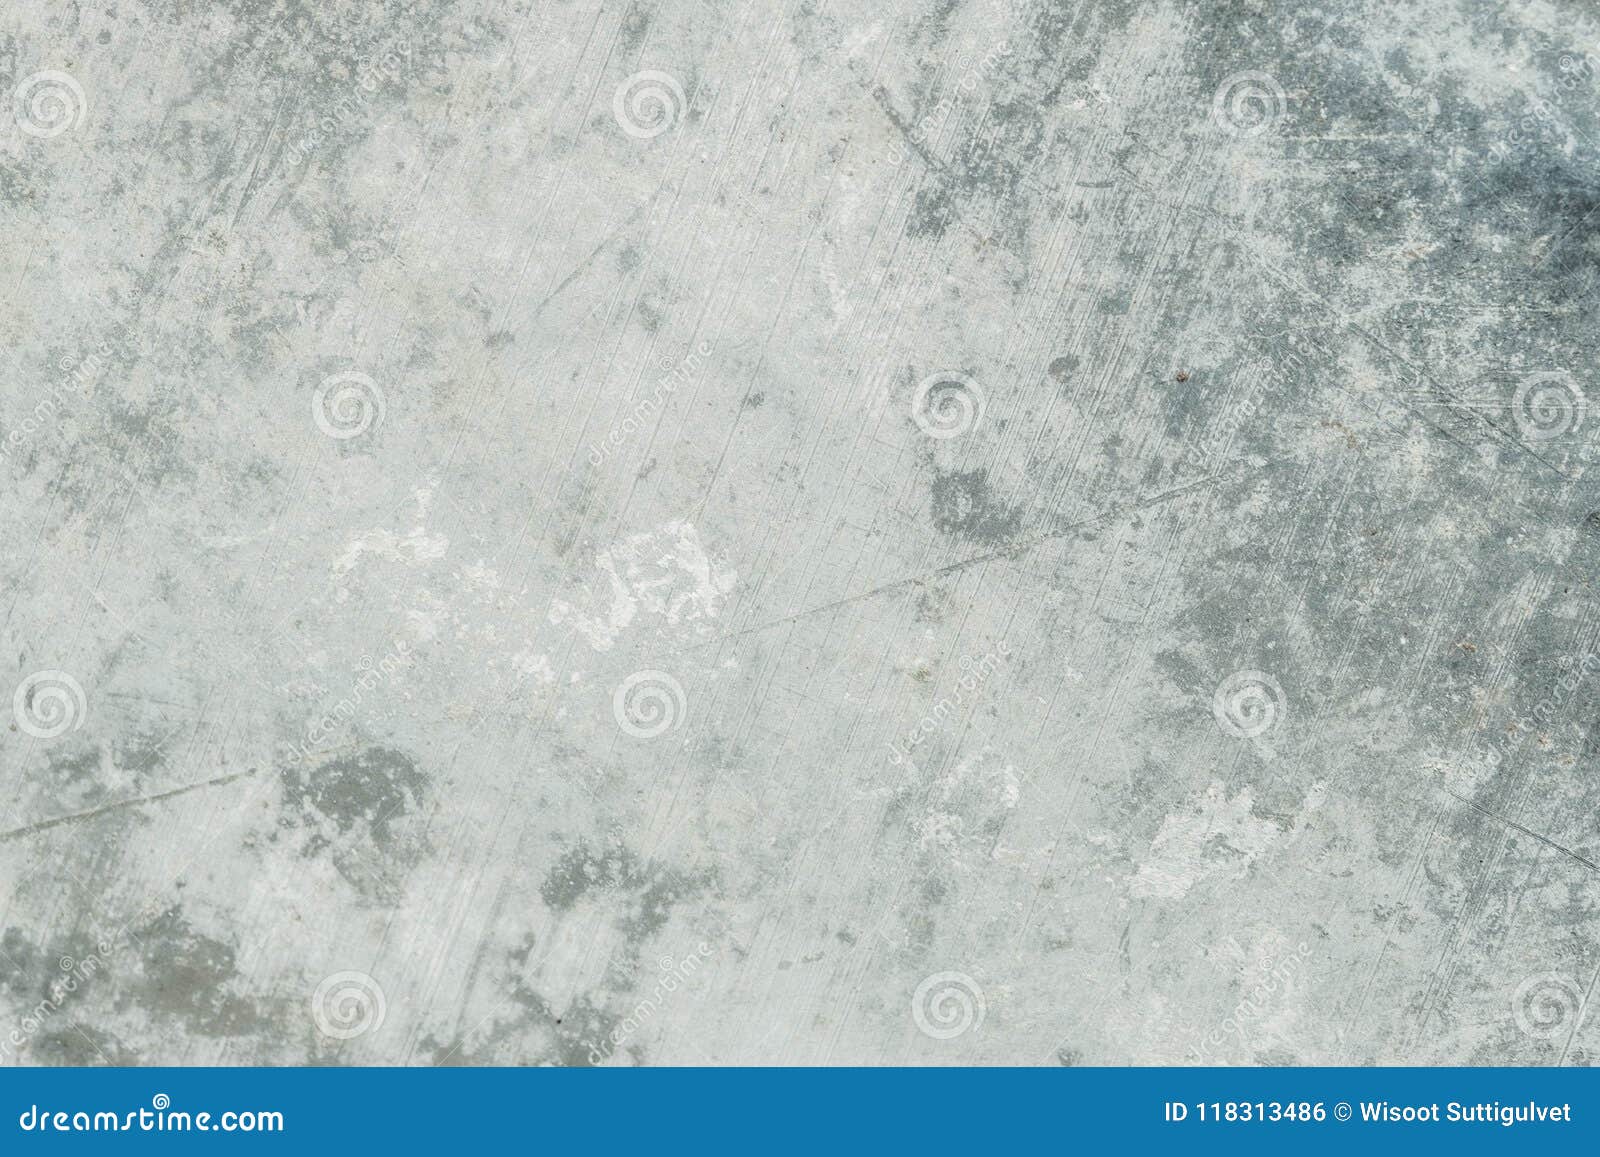 zinc galvanized grunge metal texture. old galvanised steel background. close-up of a gray zinc plate